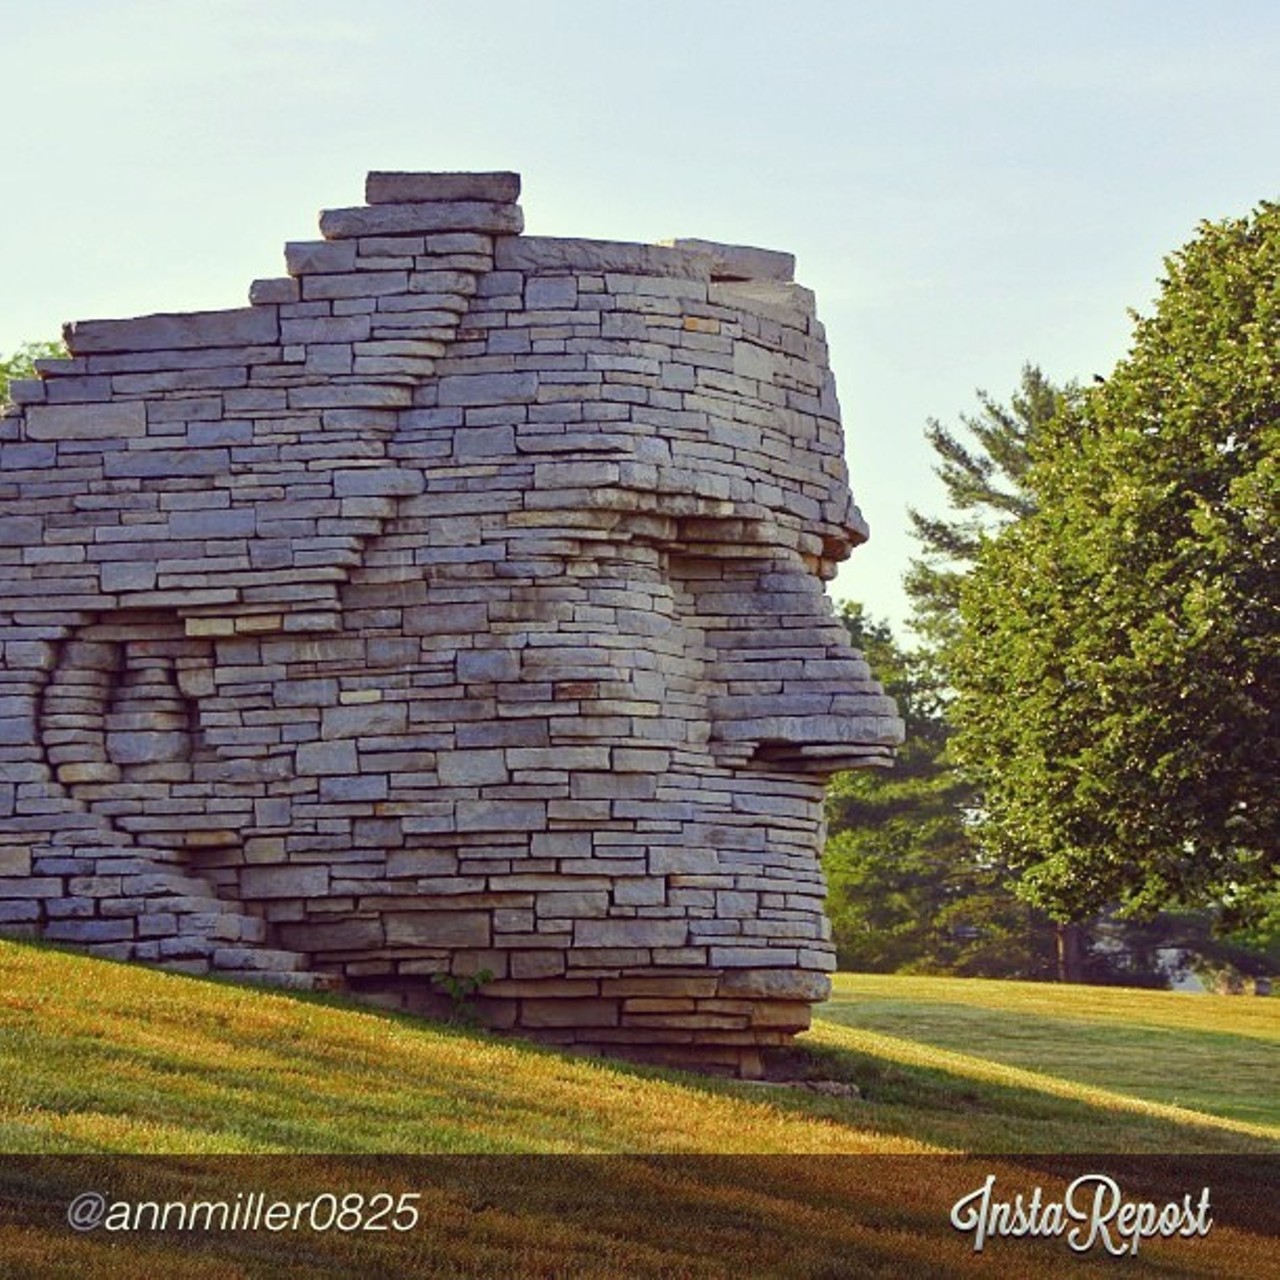 The Chief Leatherlips Monument in Dublin Scioto Park is worth a trip on its own. The sculpture is constructed from native limestone and is open on the top. Climb up and take in the remarkable view of the river against a colorful backdrop of fall foliage.